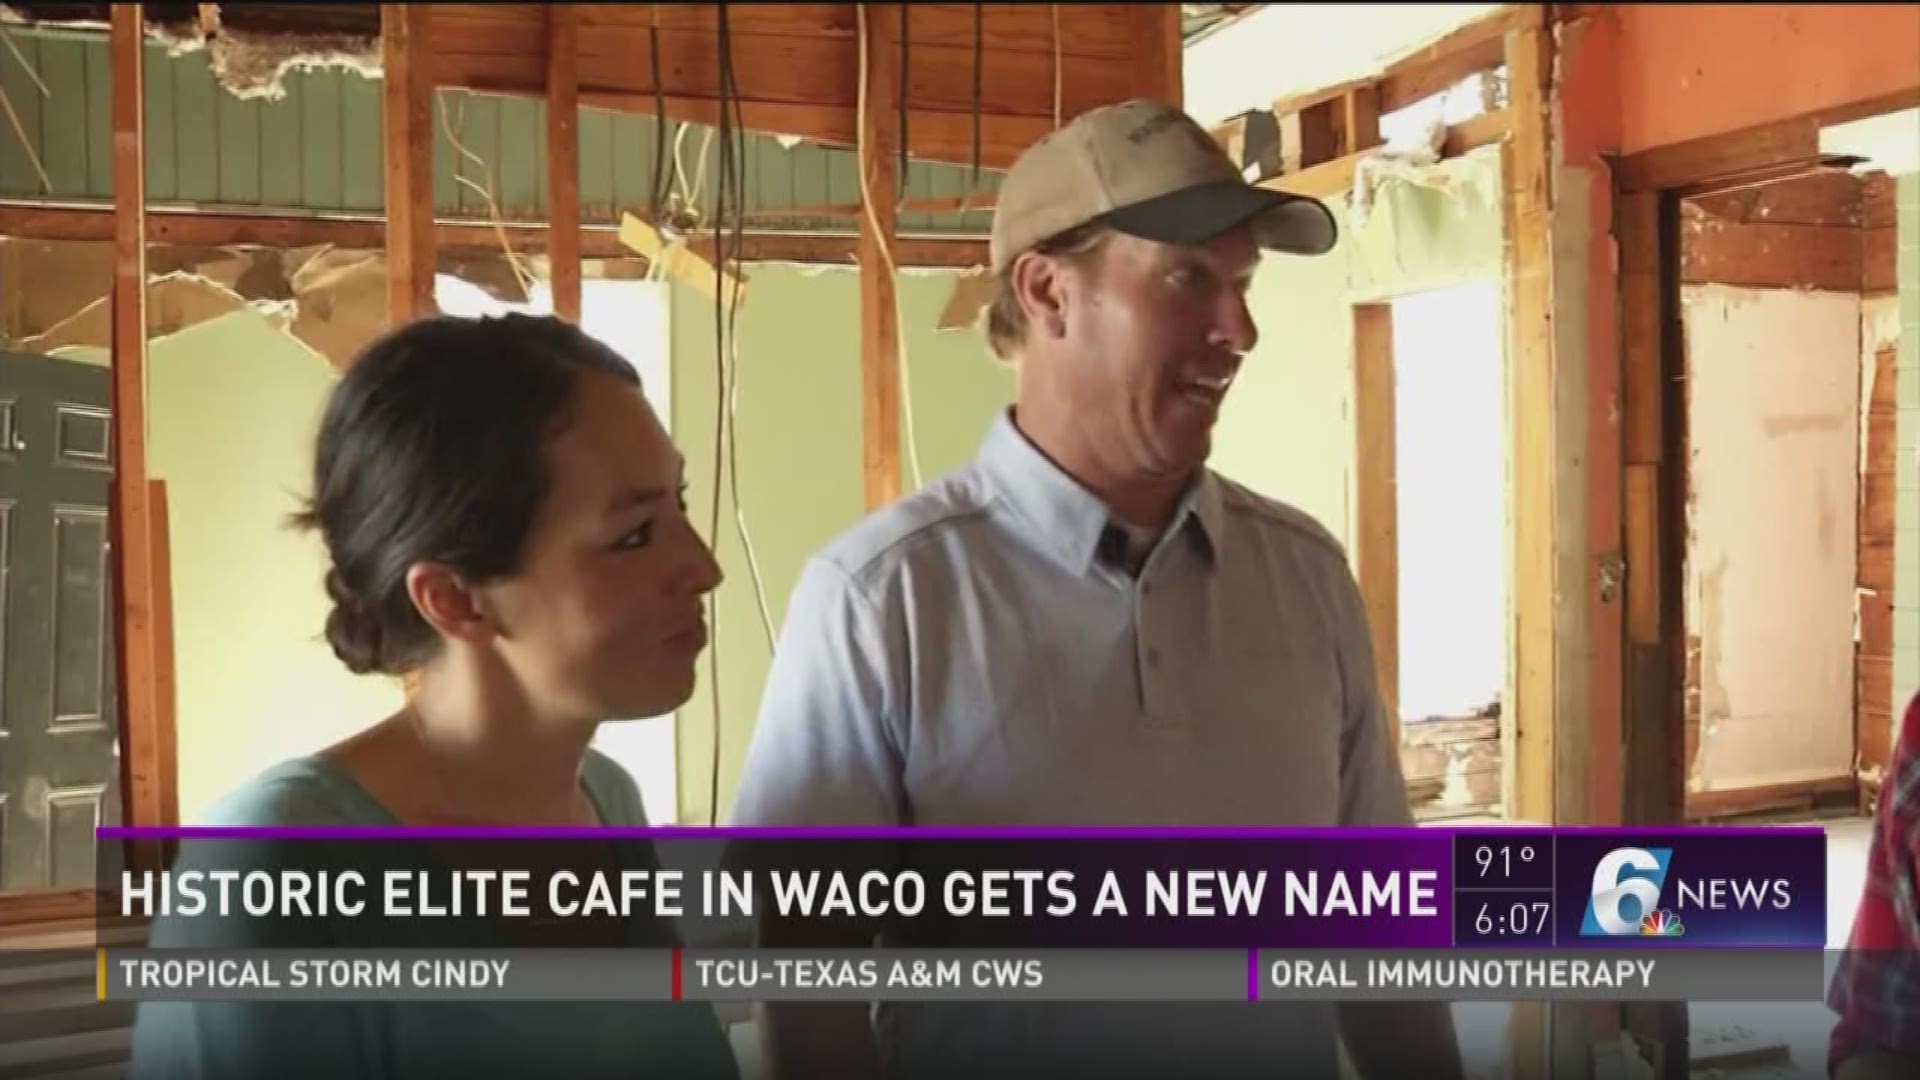 Fixer Upper couple Chip and Joana Gaines have purchased the Elite Caf� and given it a new name.